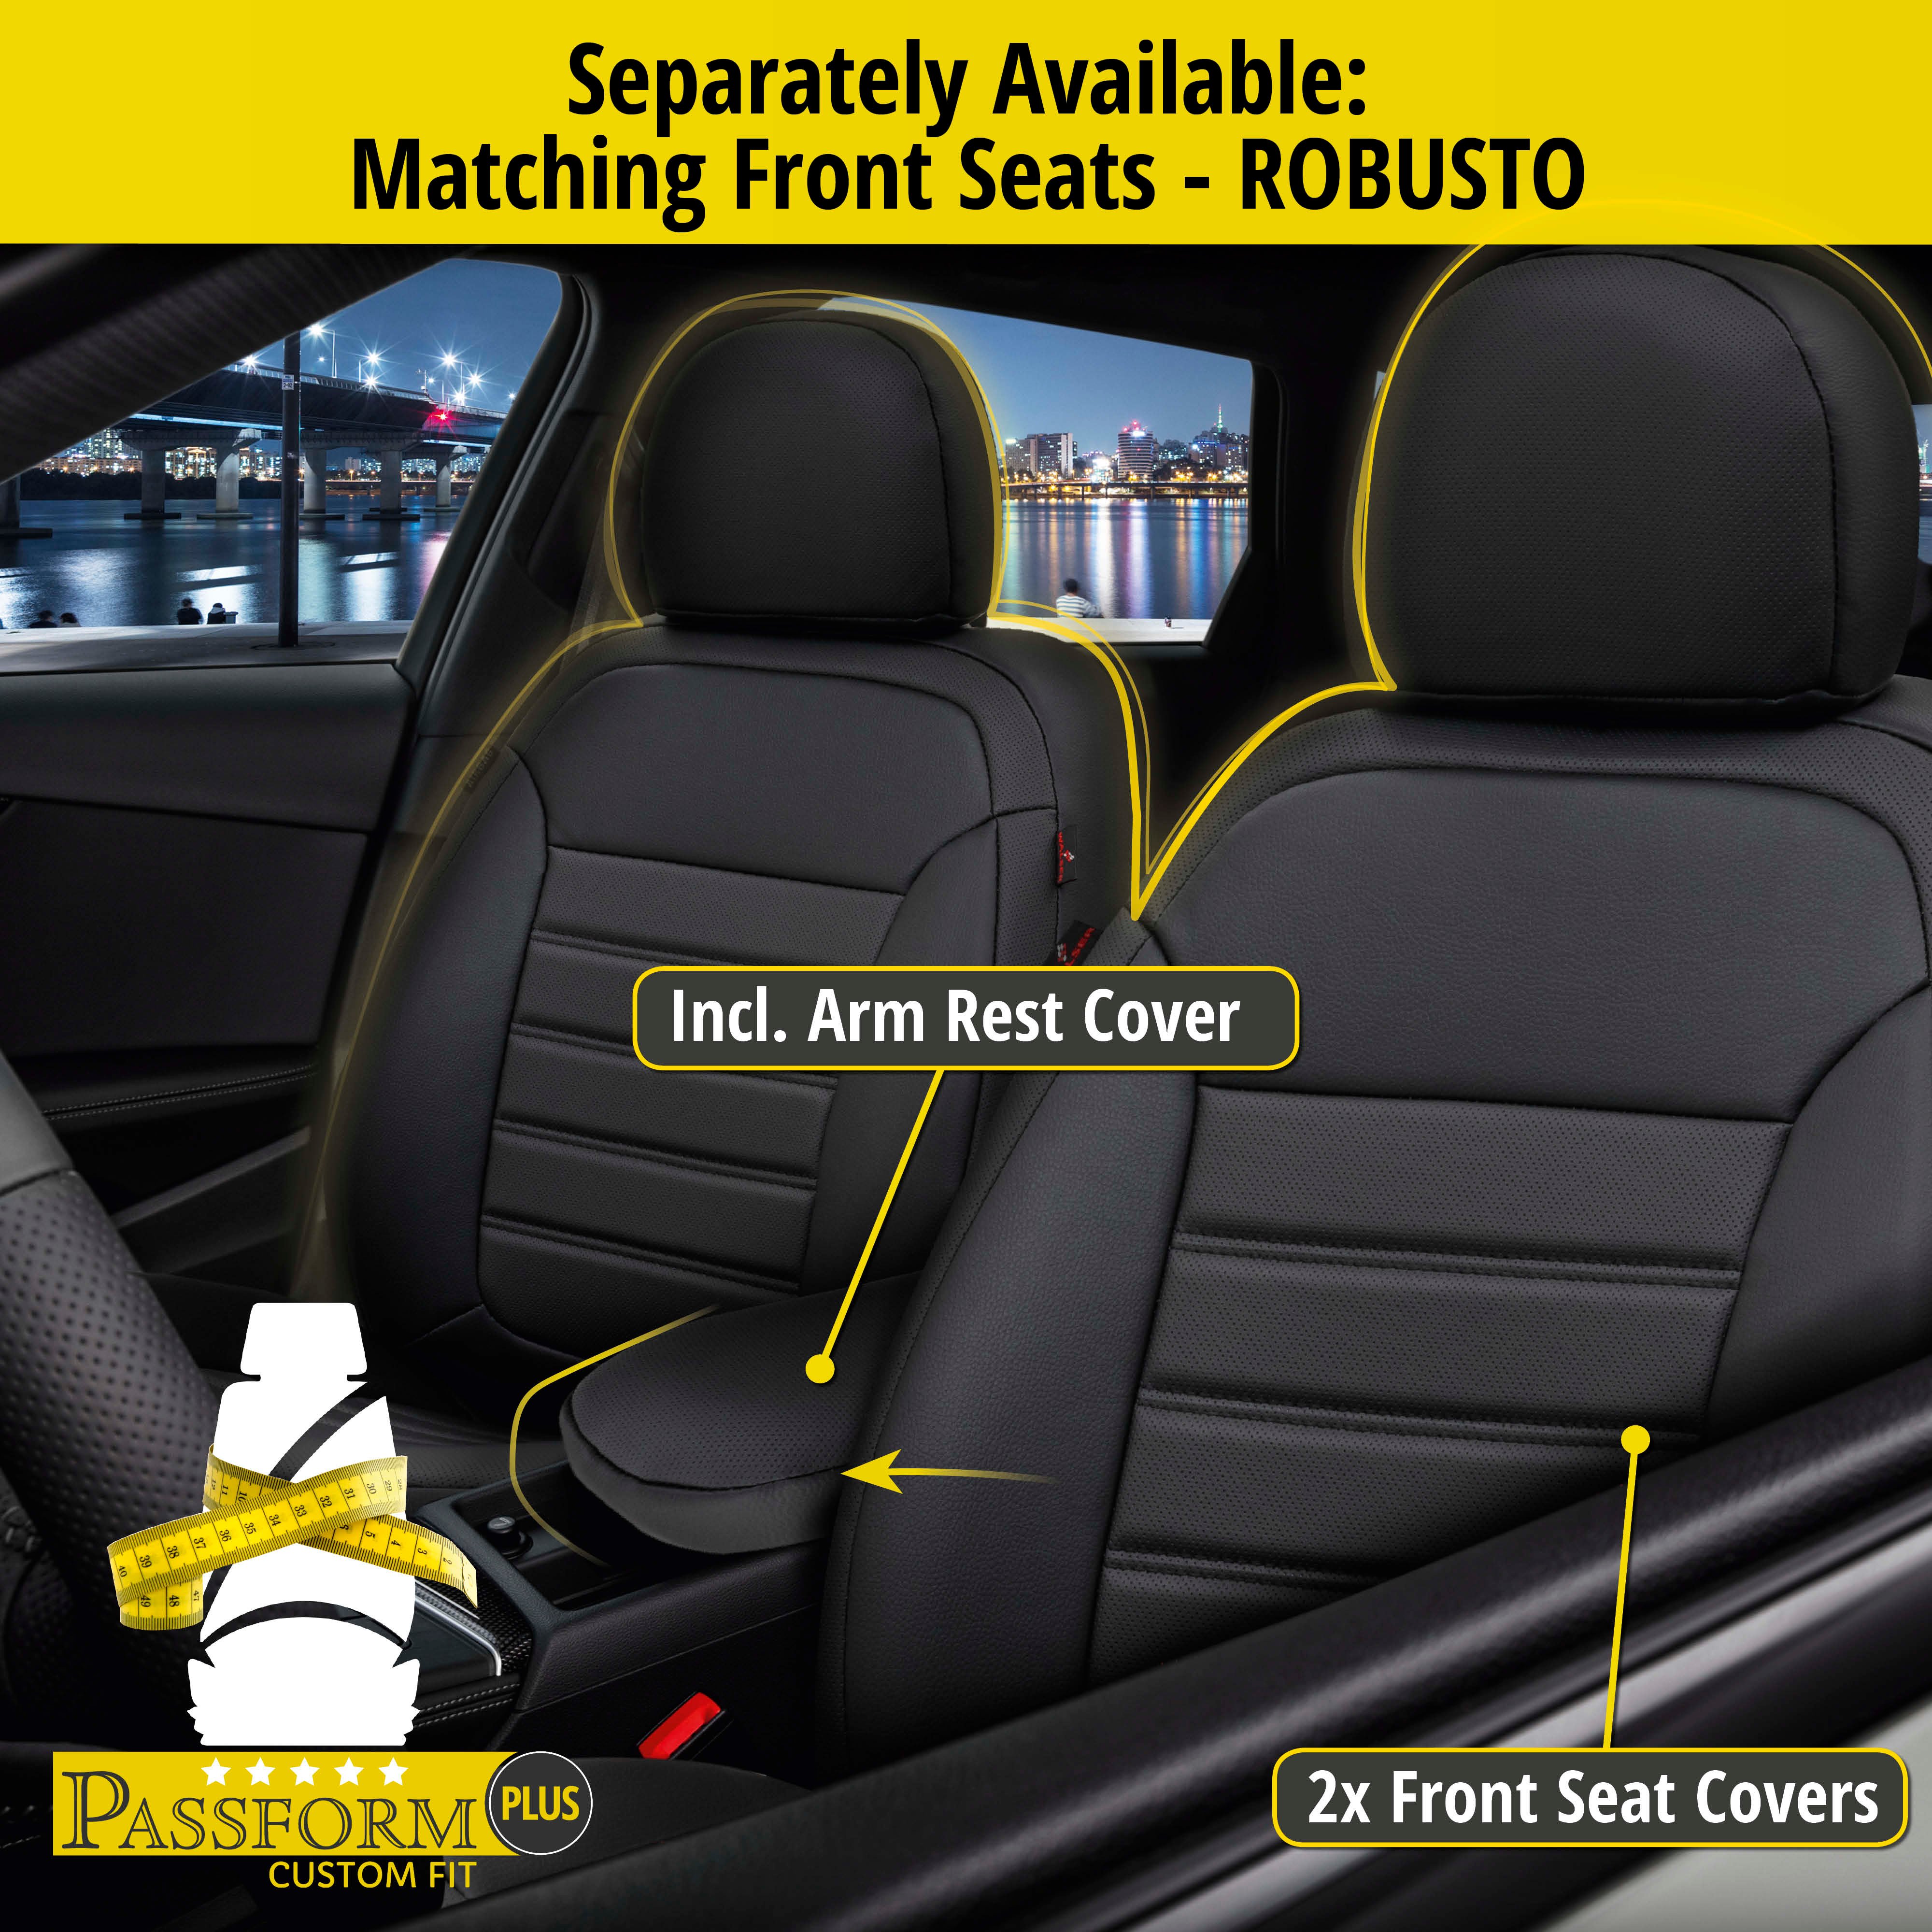 Seat Cover Robusto for Audi A4 Avant (8K5, B8) 11/2007-12/2015, 1 rear seat cover for sport seats